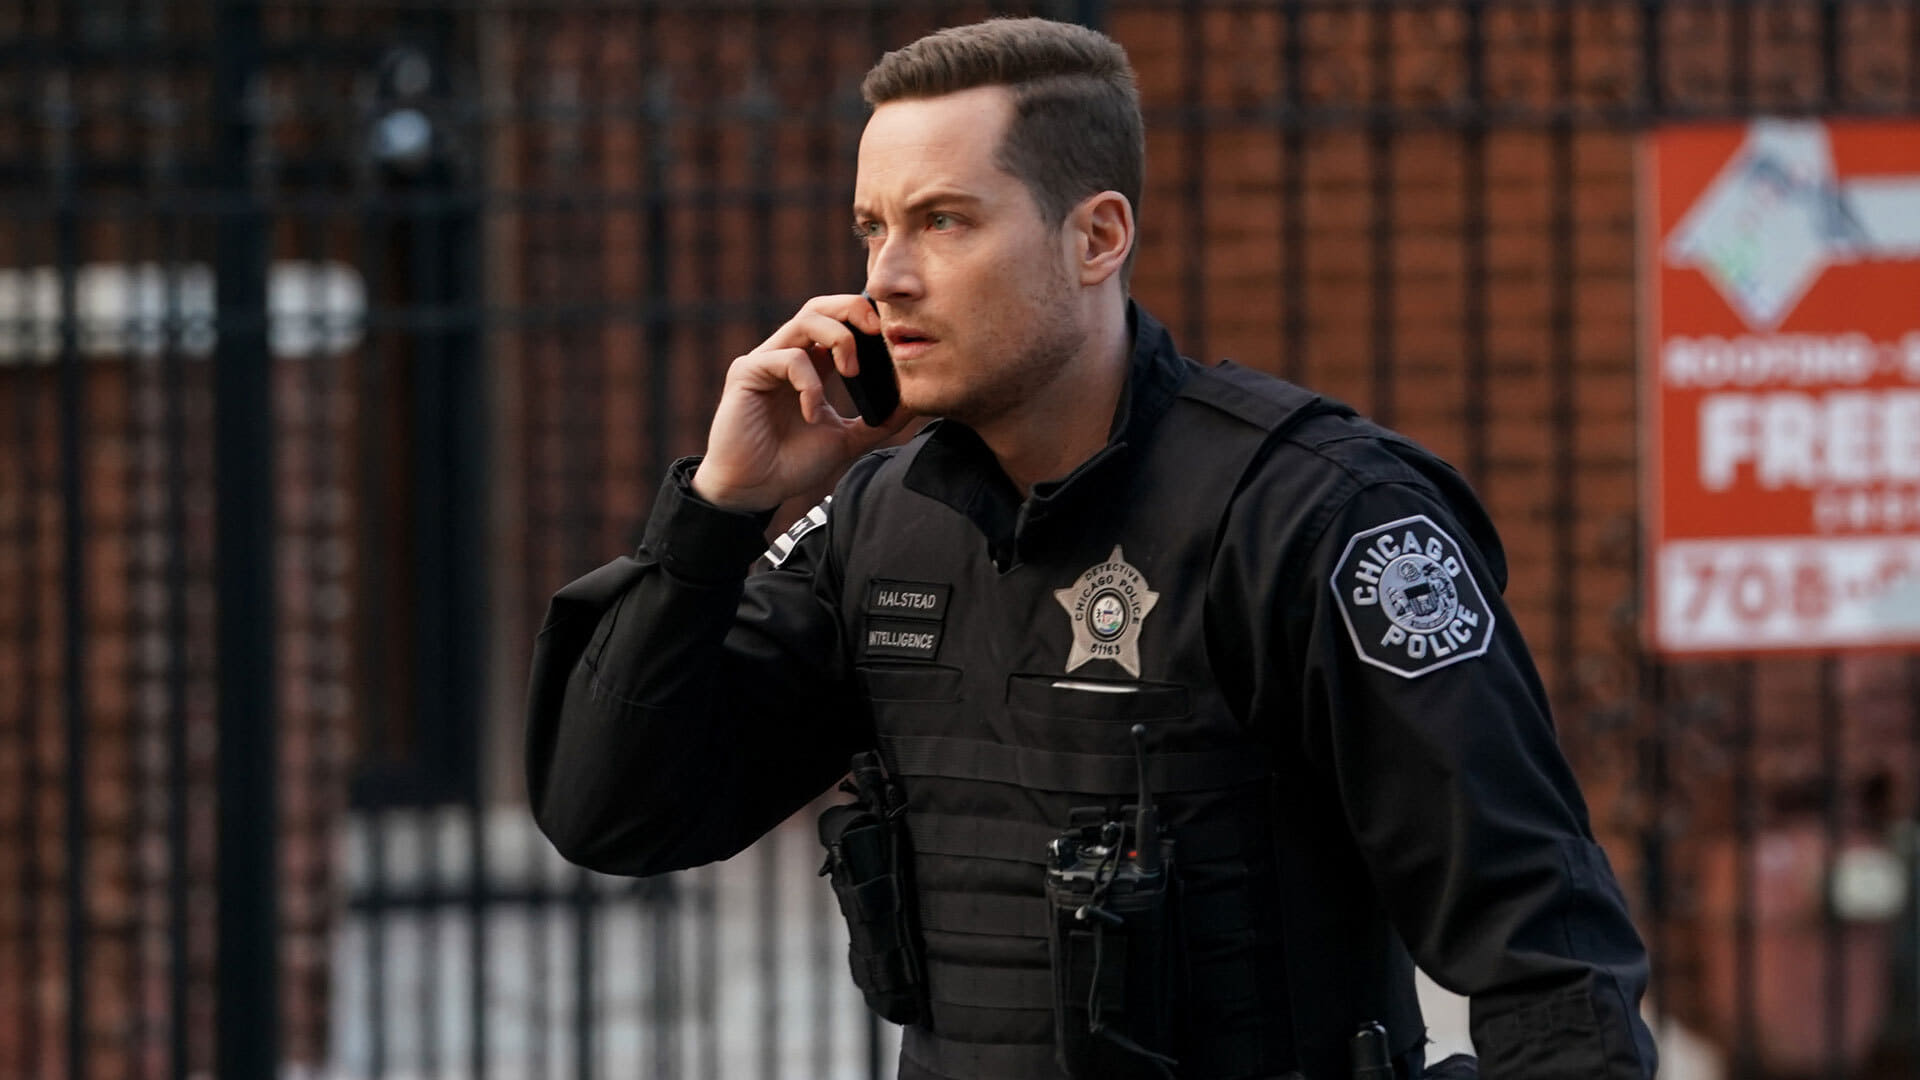 Chicago P.D. - Season 8 Episode 16 : The Other Side (2)